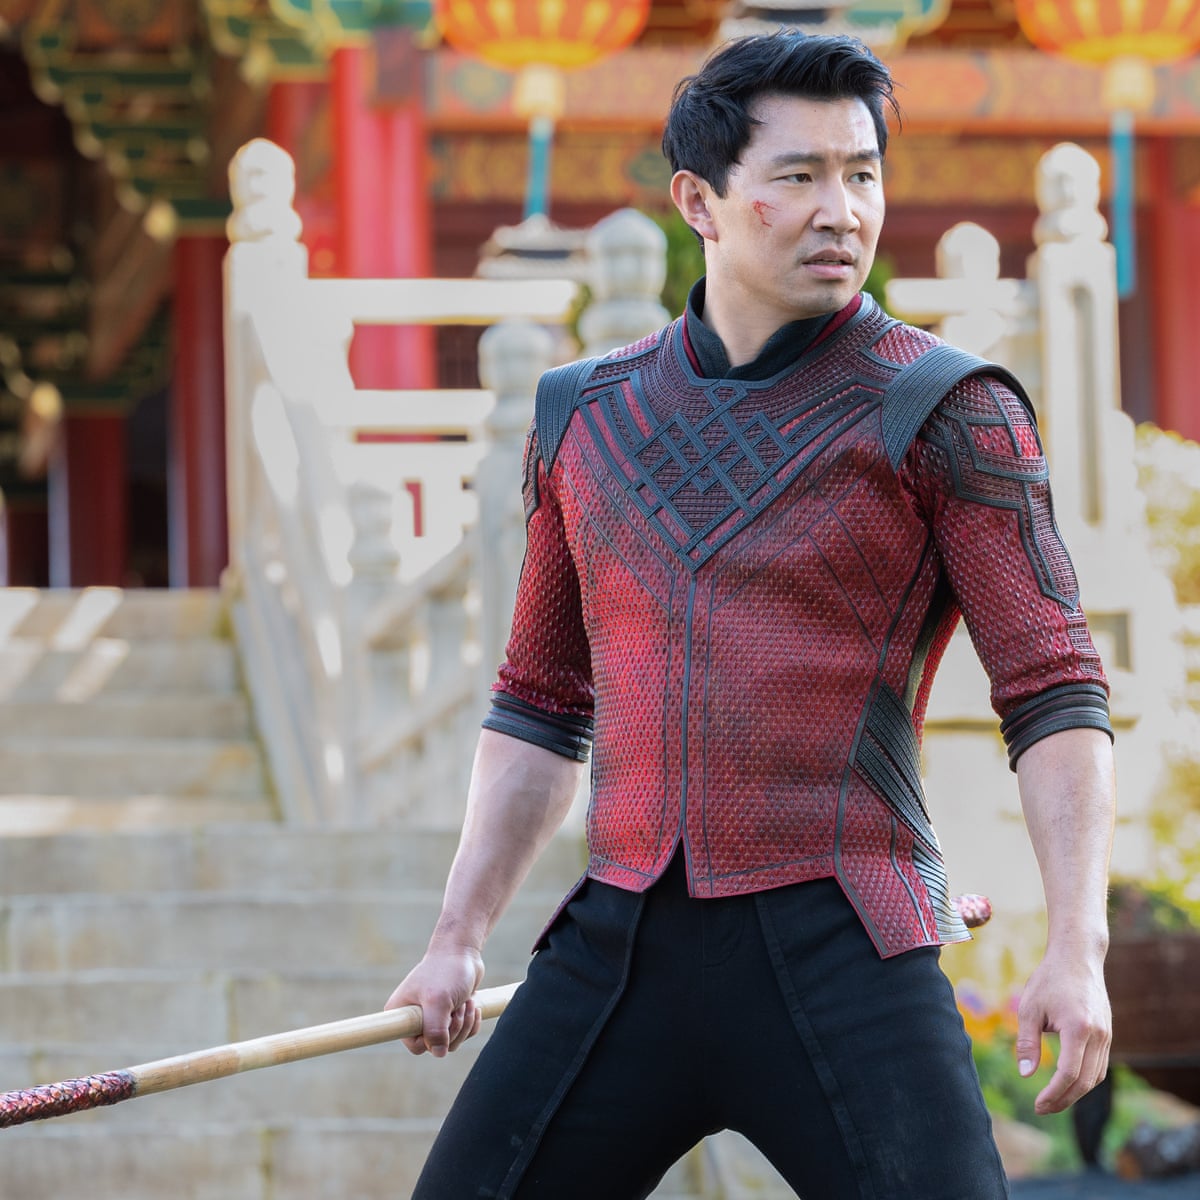 Sima Liu is great in the fight sequences, but he's understated in the drama scenes and doesn't have the charisma of Chadwick Boseman or Robert Downey Jr.

#mcutimelinerewatch #shangchiandthelegendofthetenrings #shangchi https://t.co/Kz5UFdSfM7